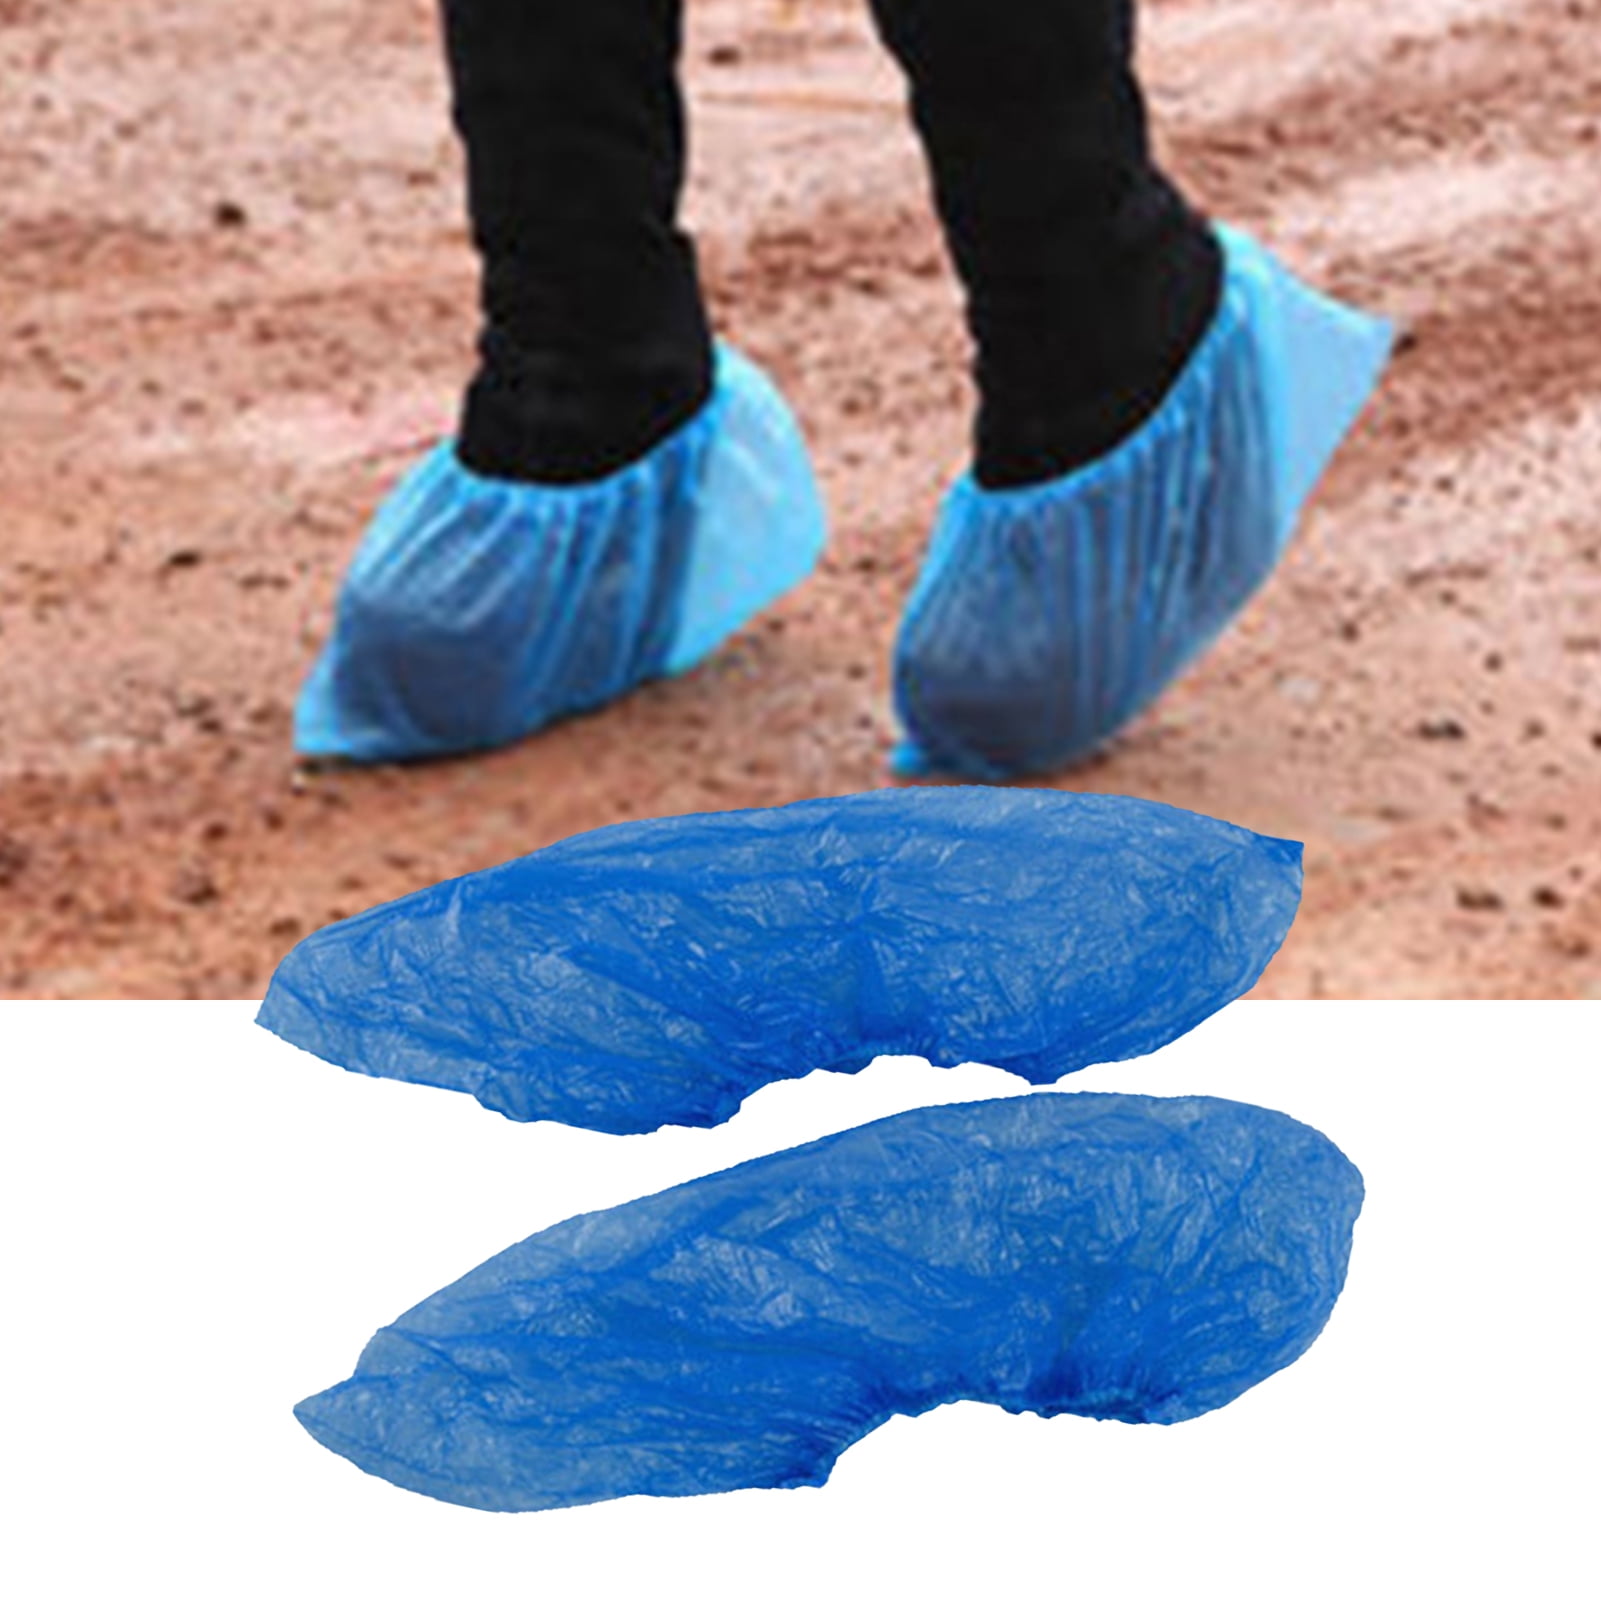 200 Pcs Disposable Overshoes,Plastic Waterproof Shoe Covers Boot Cover Anti Slip Cleaning Shoe Protector Overshoes for Medical Construction Carpet Floor Protection Cleaning Accessories 